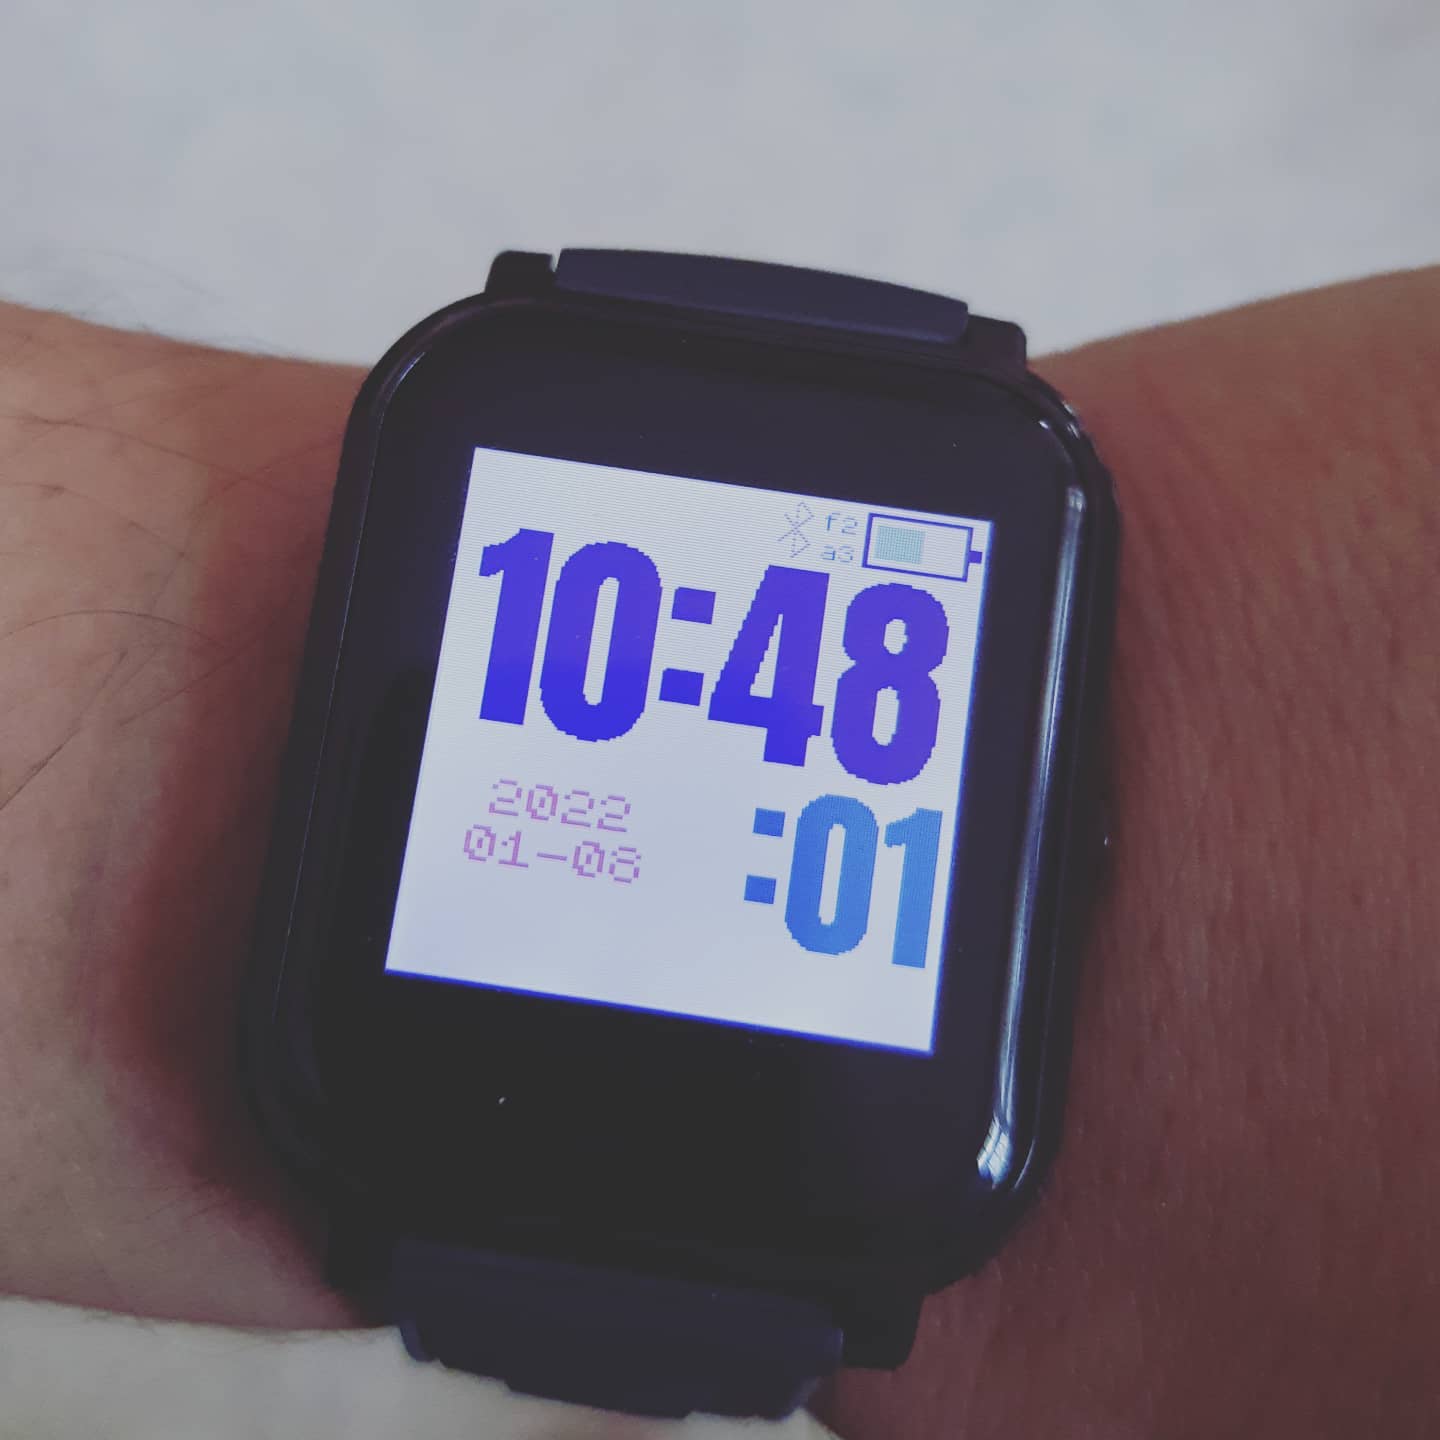 Looks like a good alternative to my pebble time.  Do you want to guess?